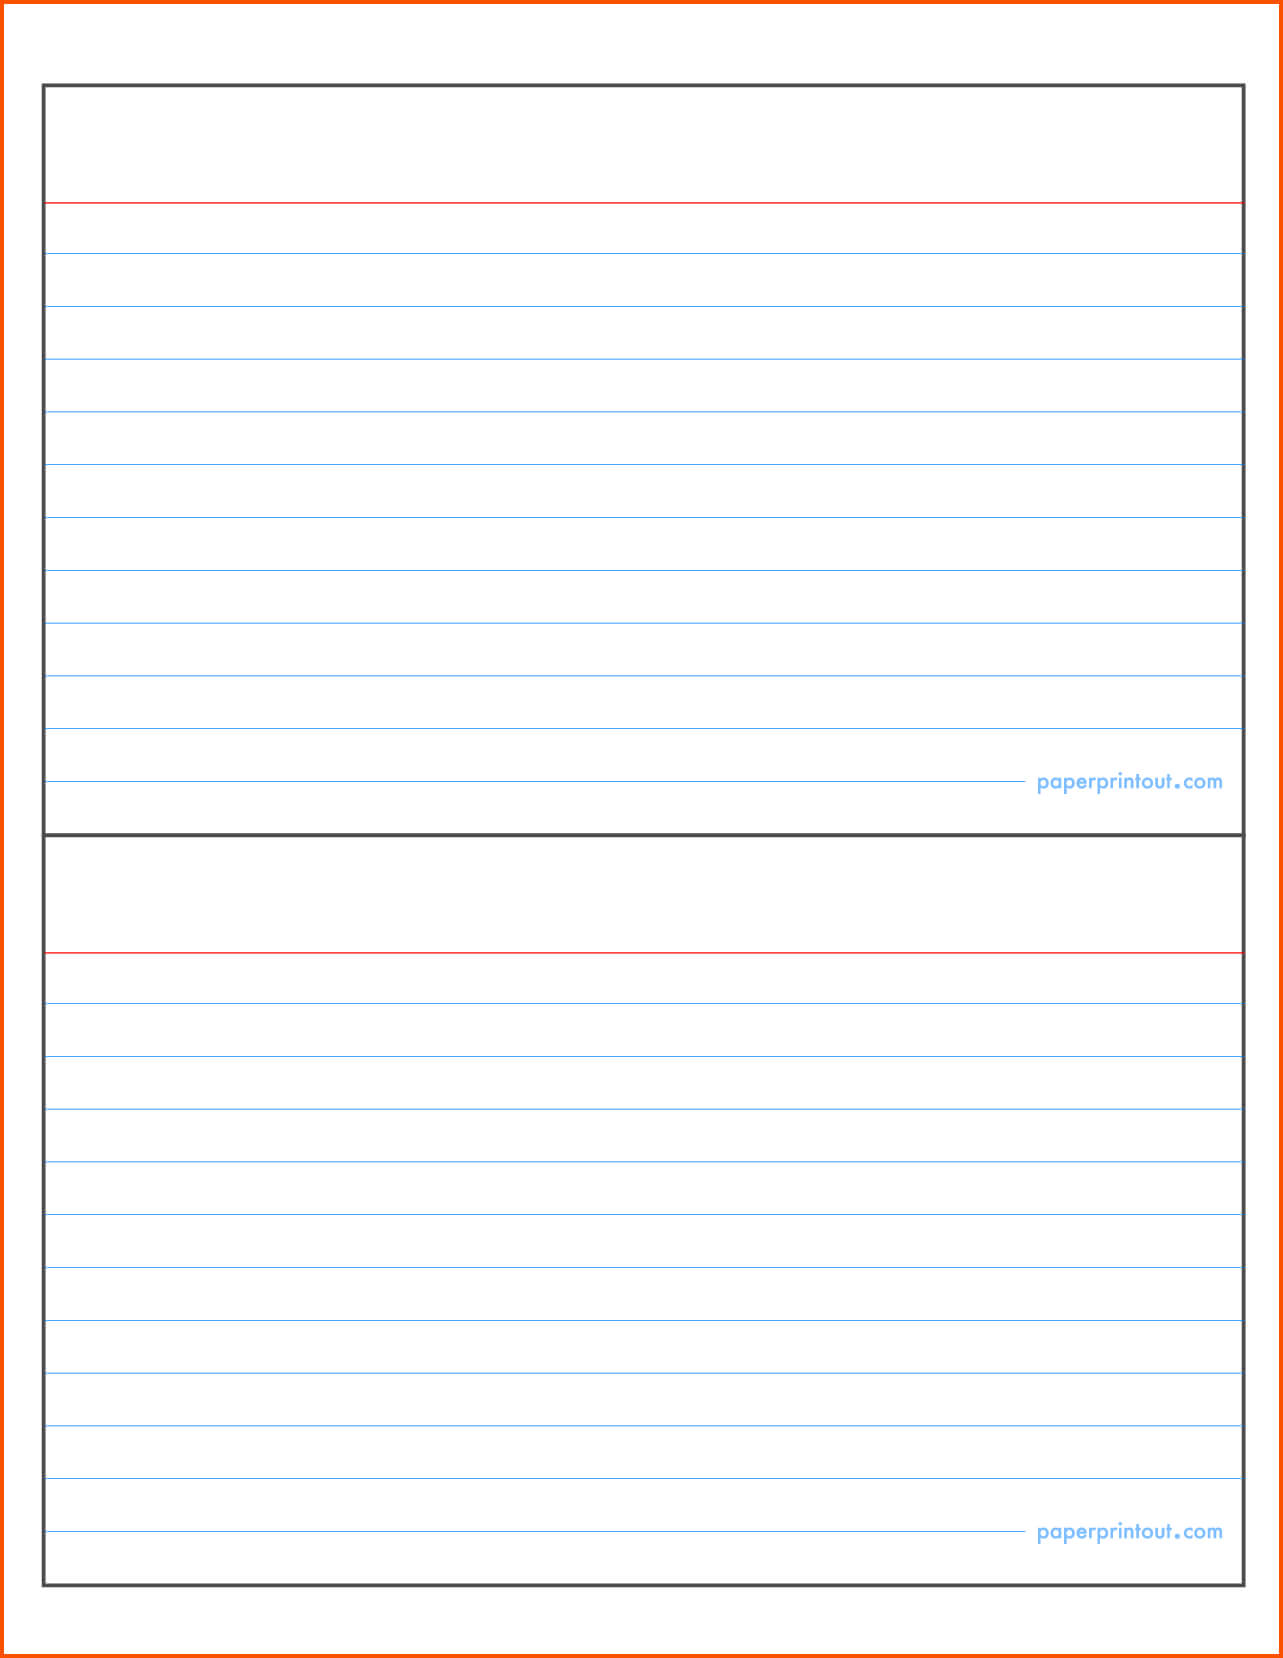 20 Images Of Ms Word 3 X 5 Index Card Template | Zeept Inside Word Template For 3X5 Index Cards